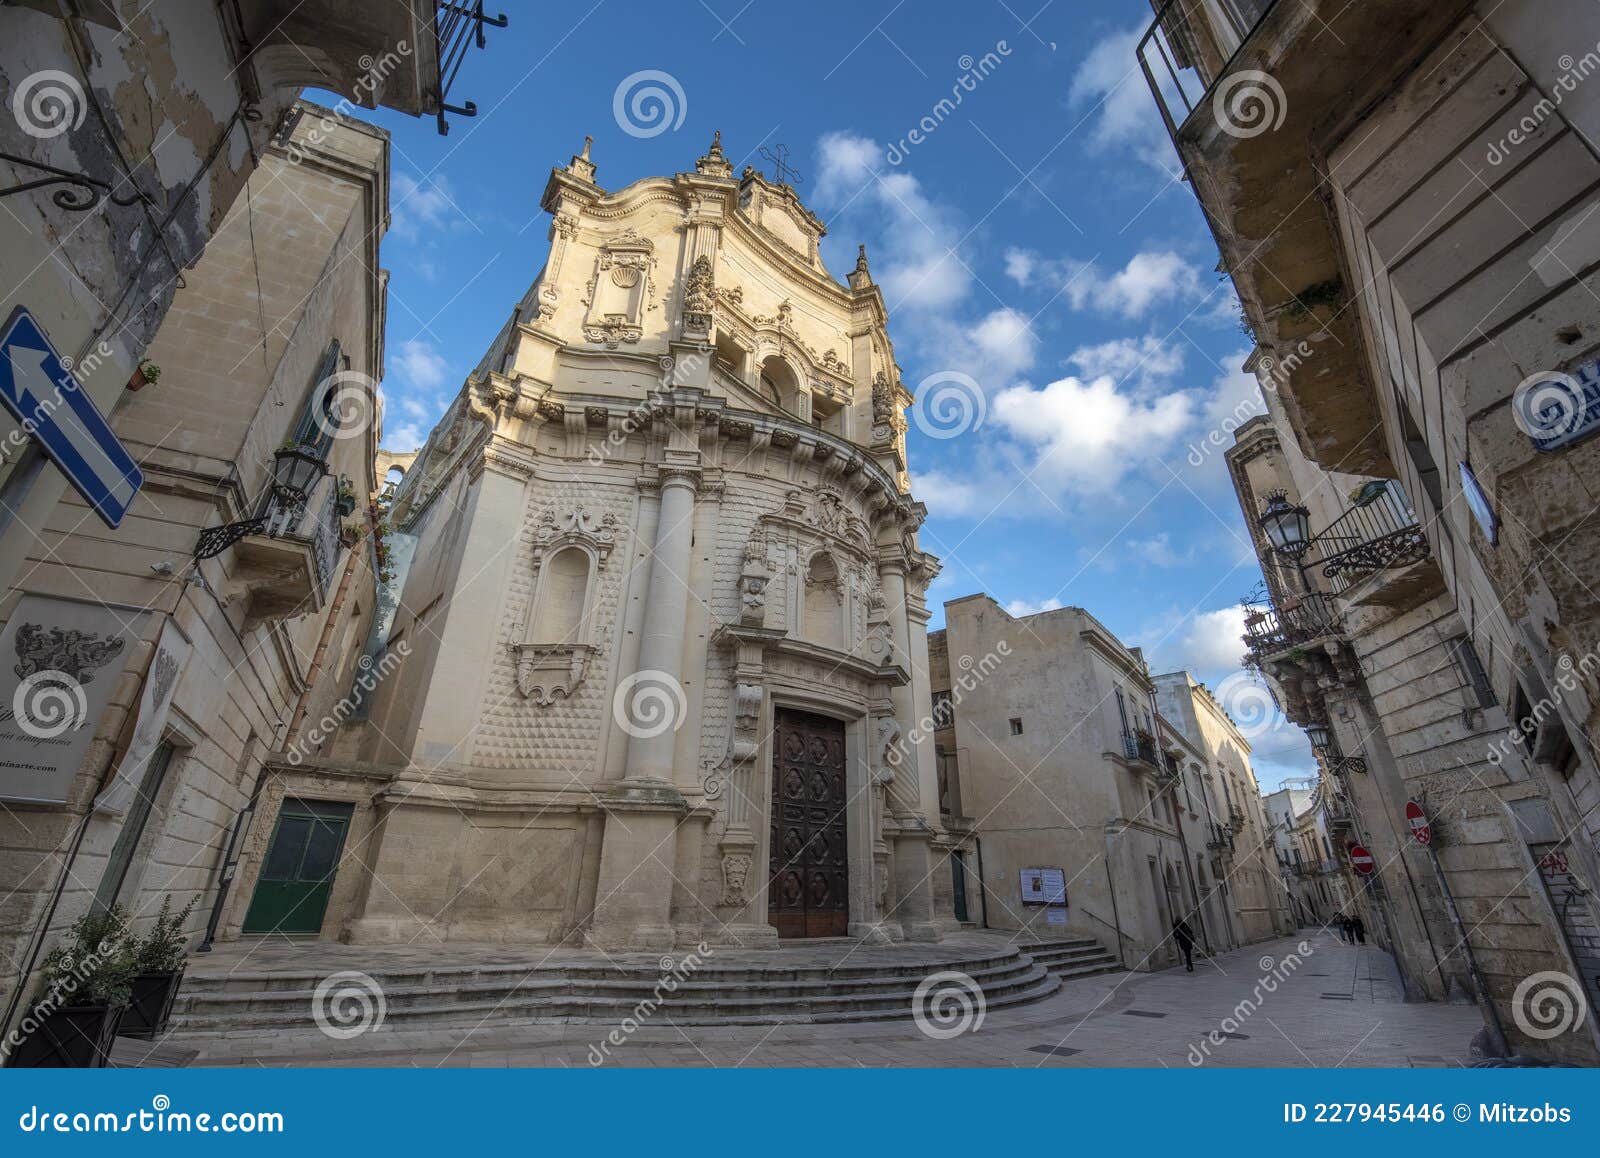 church of san matteo in lecce, italy